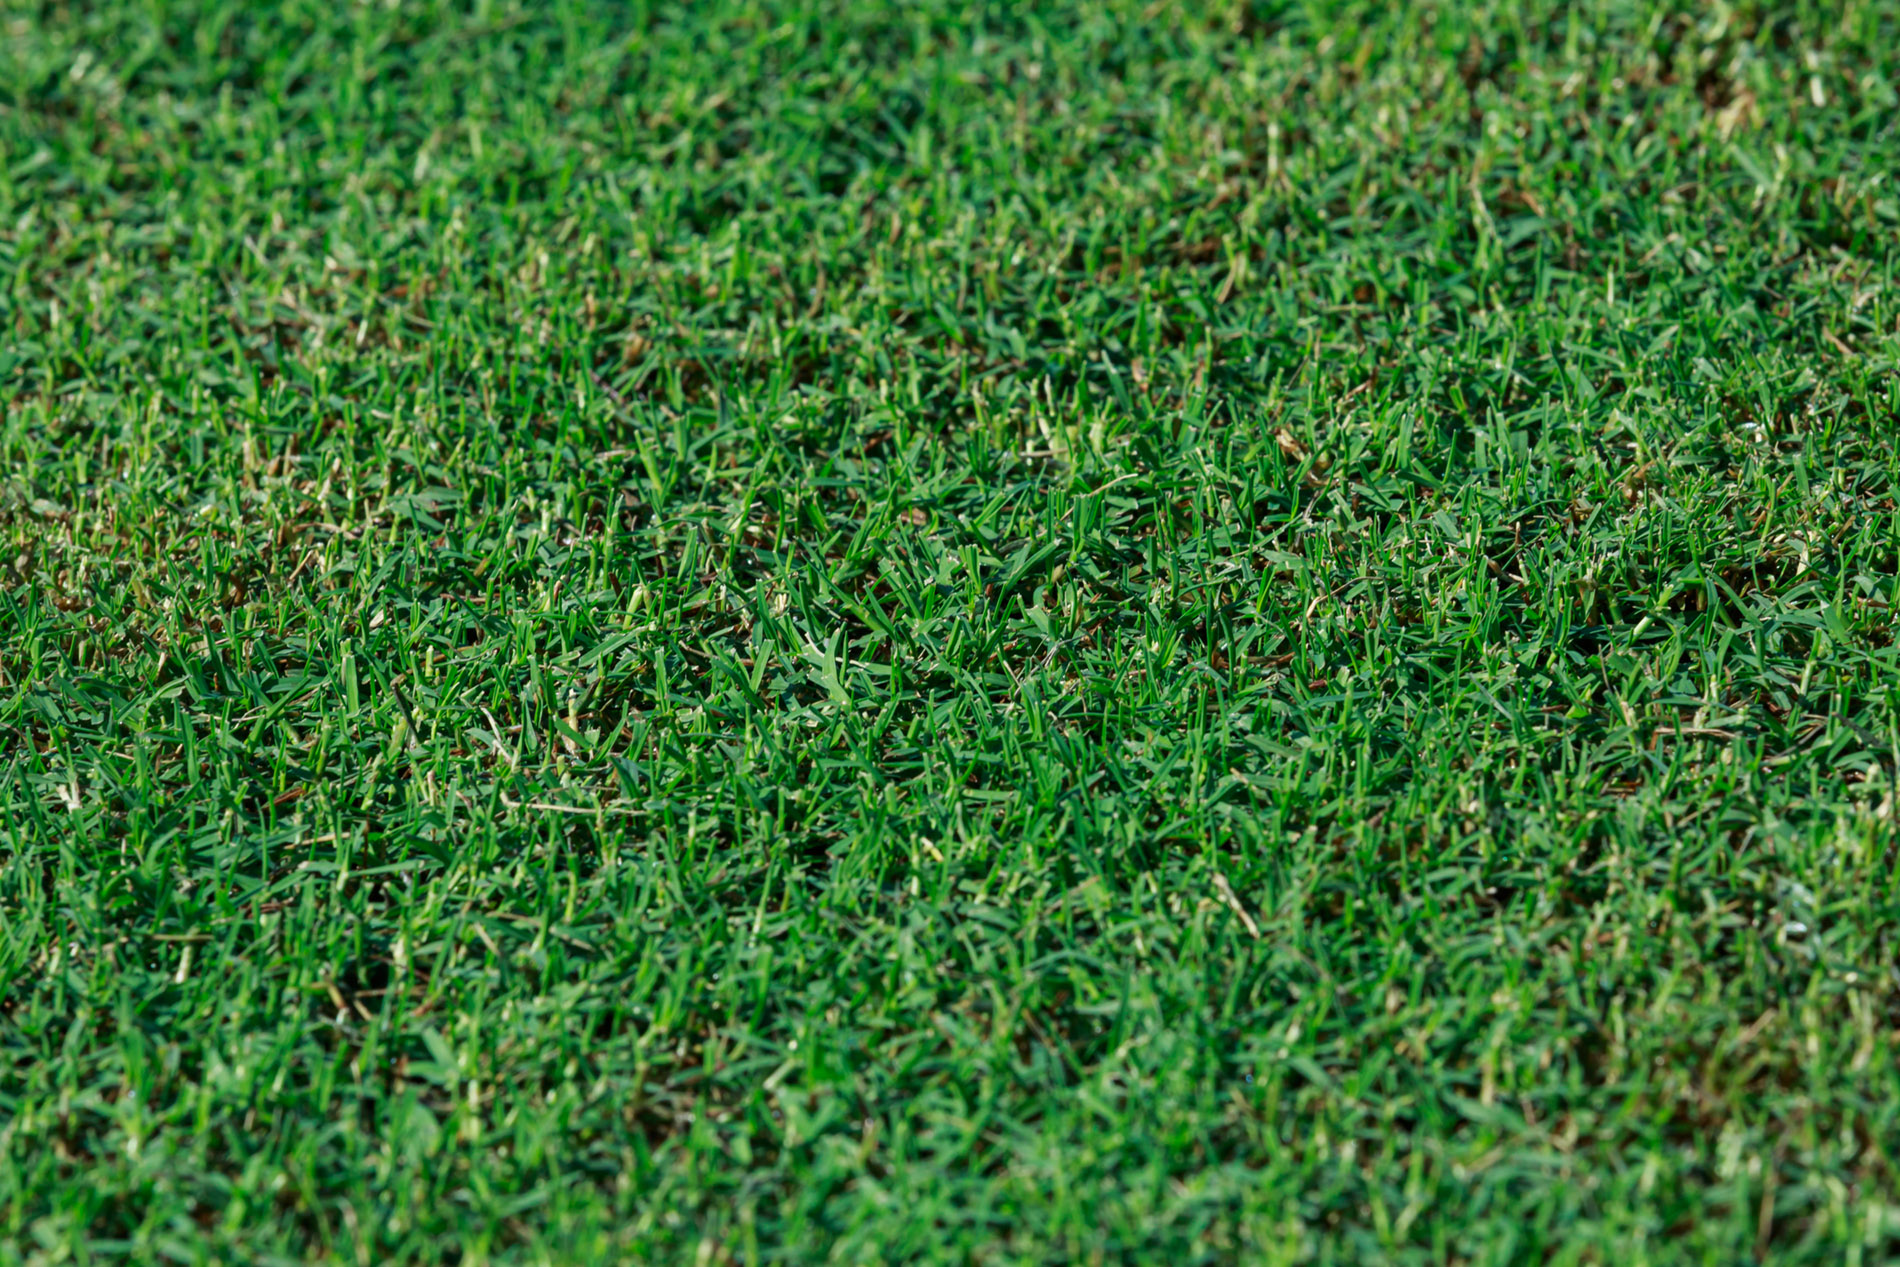 Featured image for “Tahoma 31 Bermudagrass”